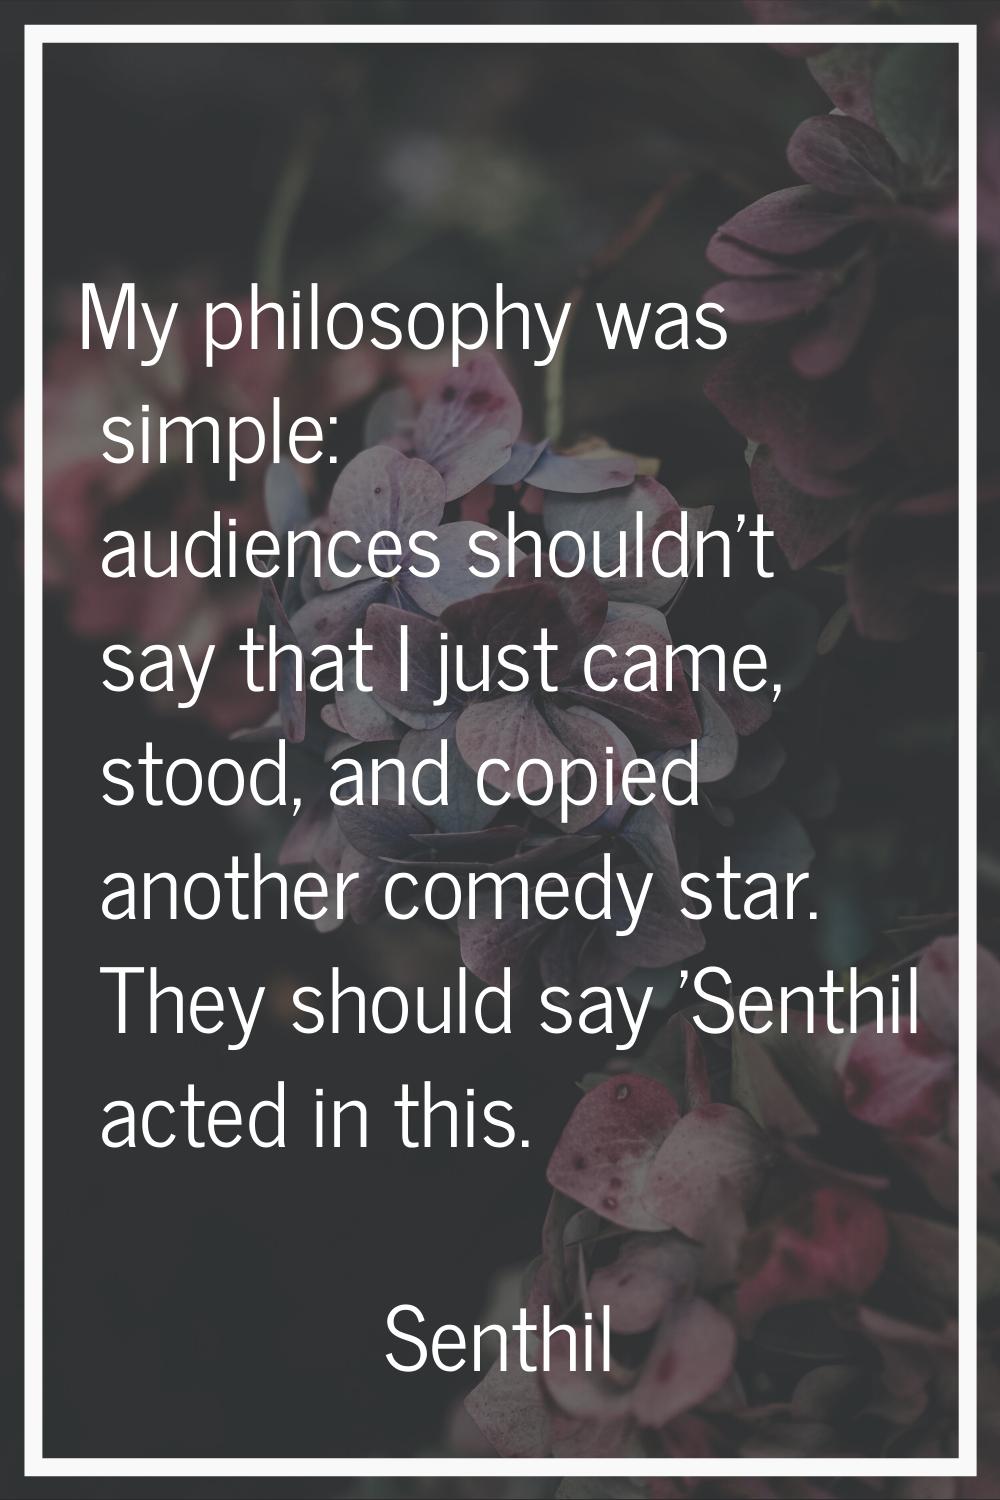 My philosophy was simple: audiences shouldn't say that I just came, stood, and copied another comed